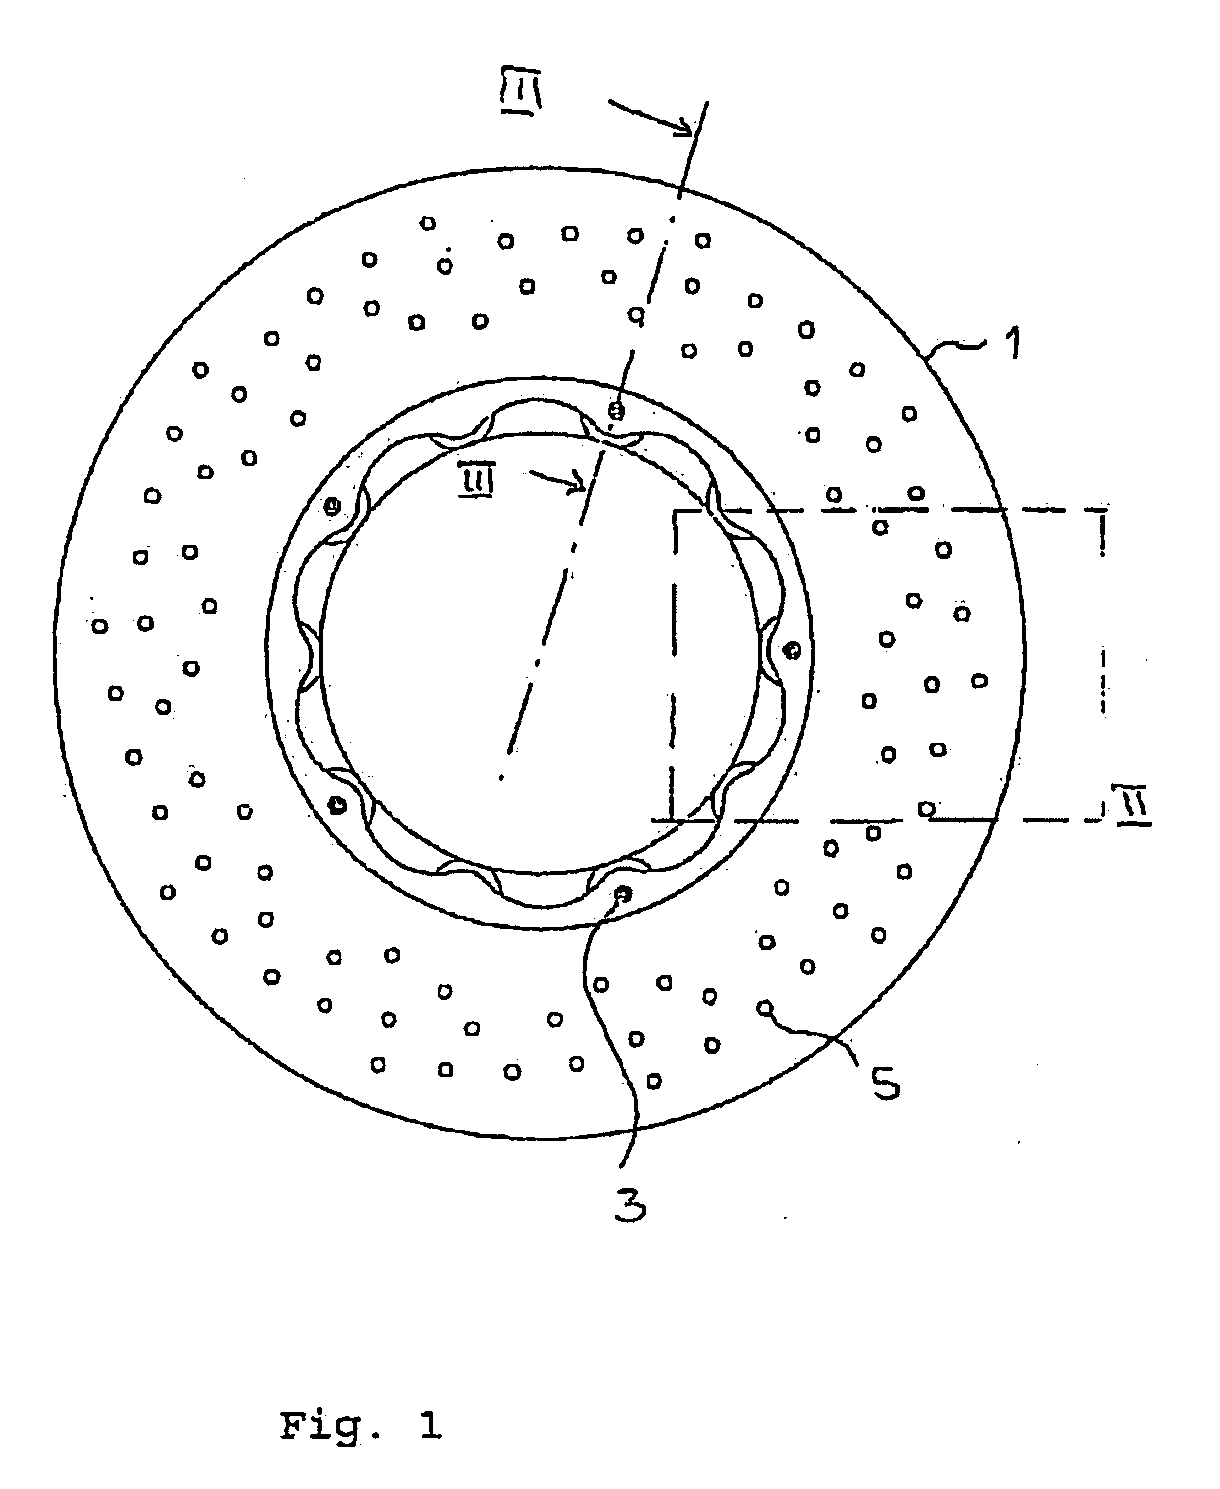 Method of Introduction of Filling Materials in Liquid Form Into Porous Bodies